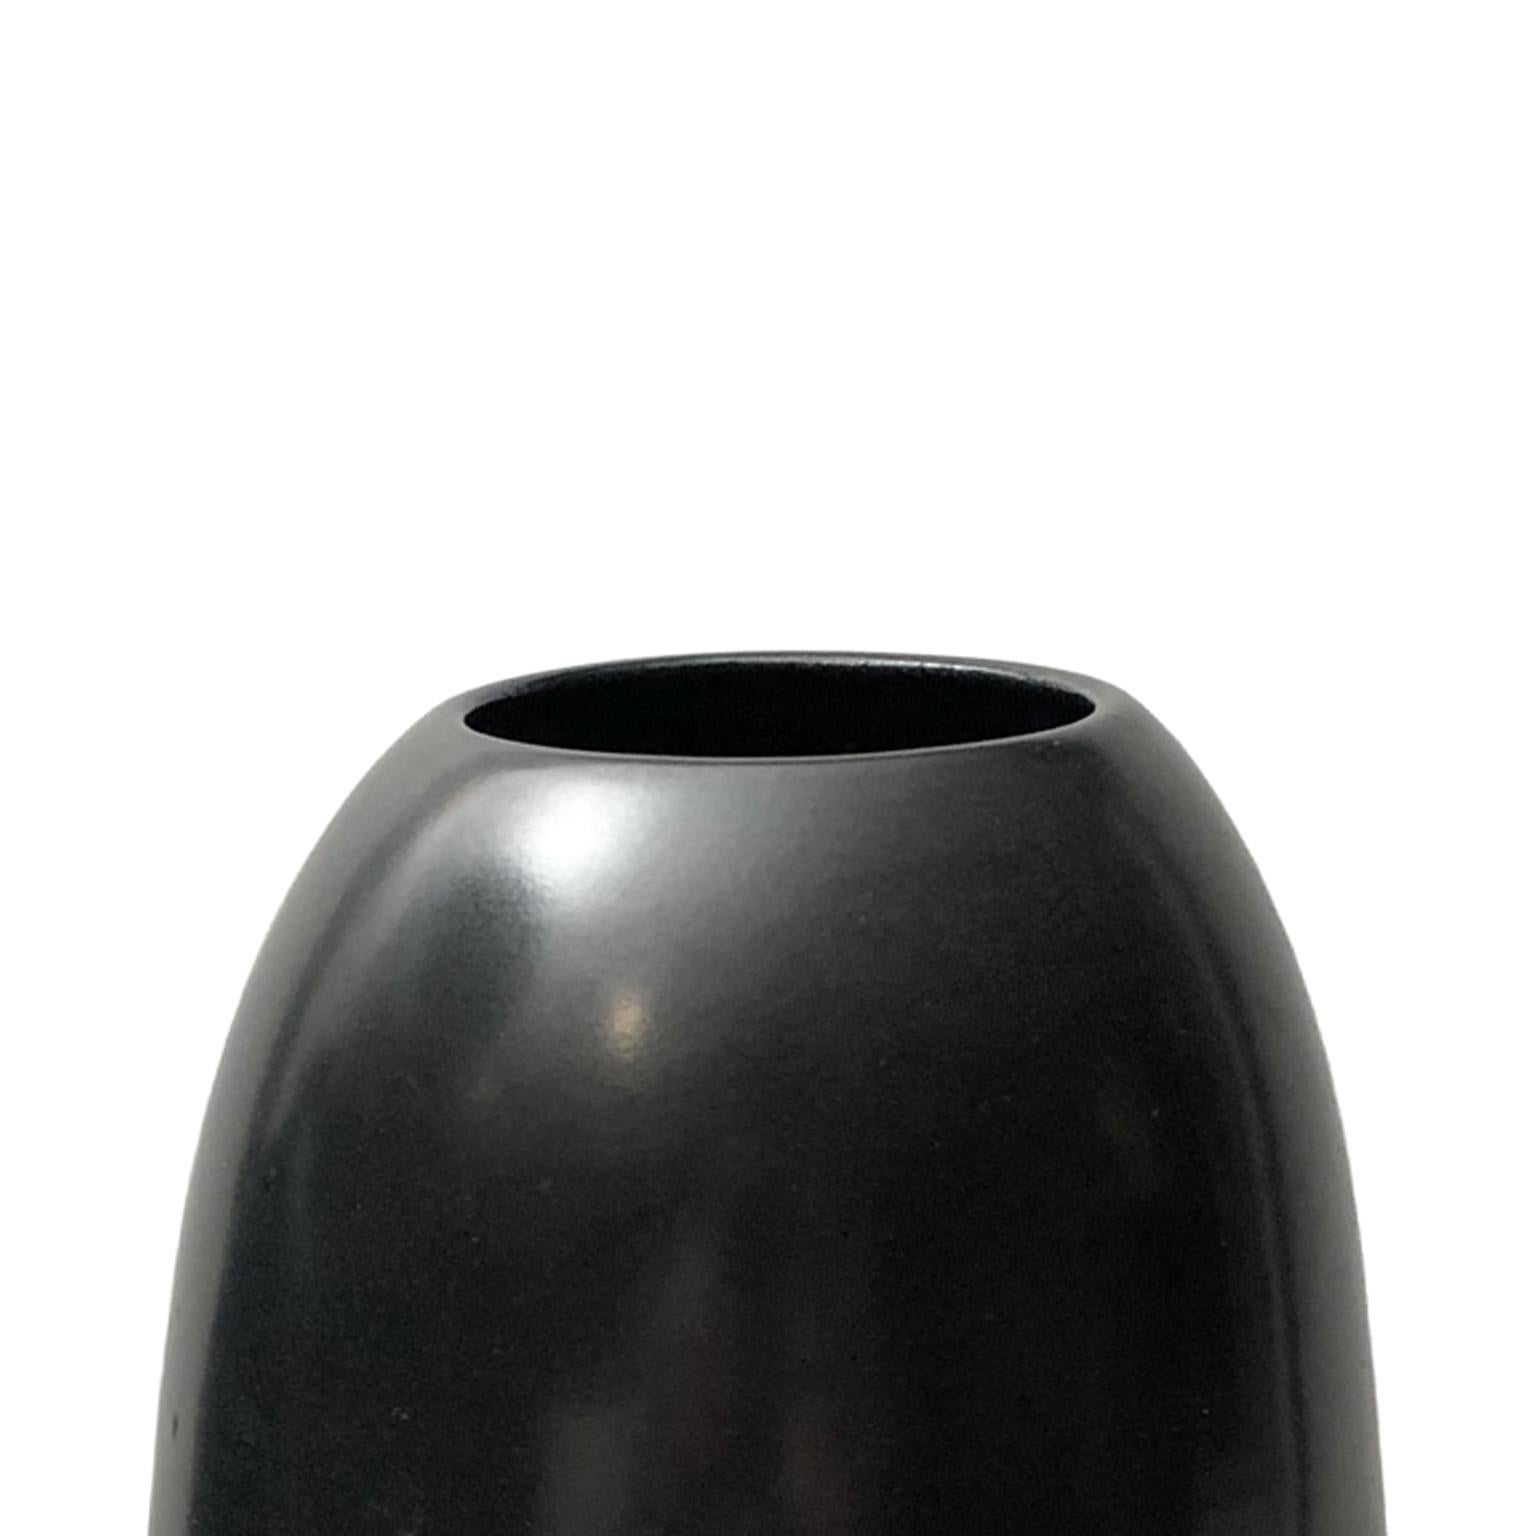 Tall ceramic pointed base ripple vase with black lustre glaze by Sandi Fellman, 2018. 

Veteran photographer Sandi Fellman's ceramic vessels are an exploration of a new medium. The forms, palettes, and sensuality of her photos can be found within